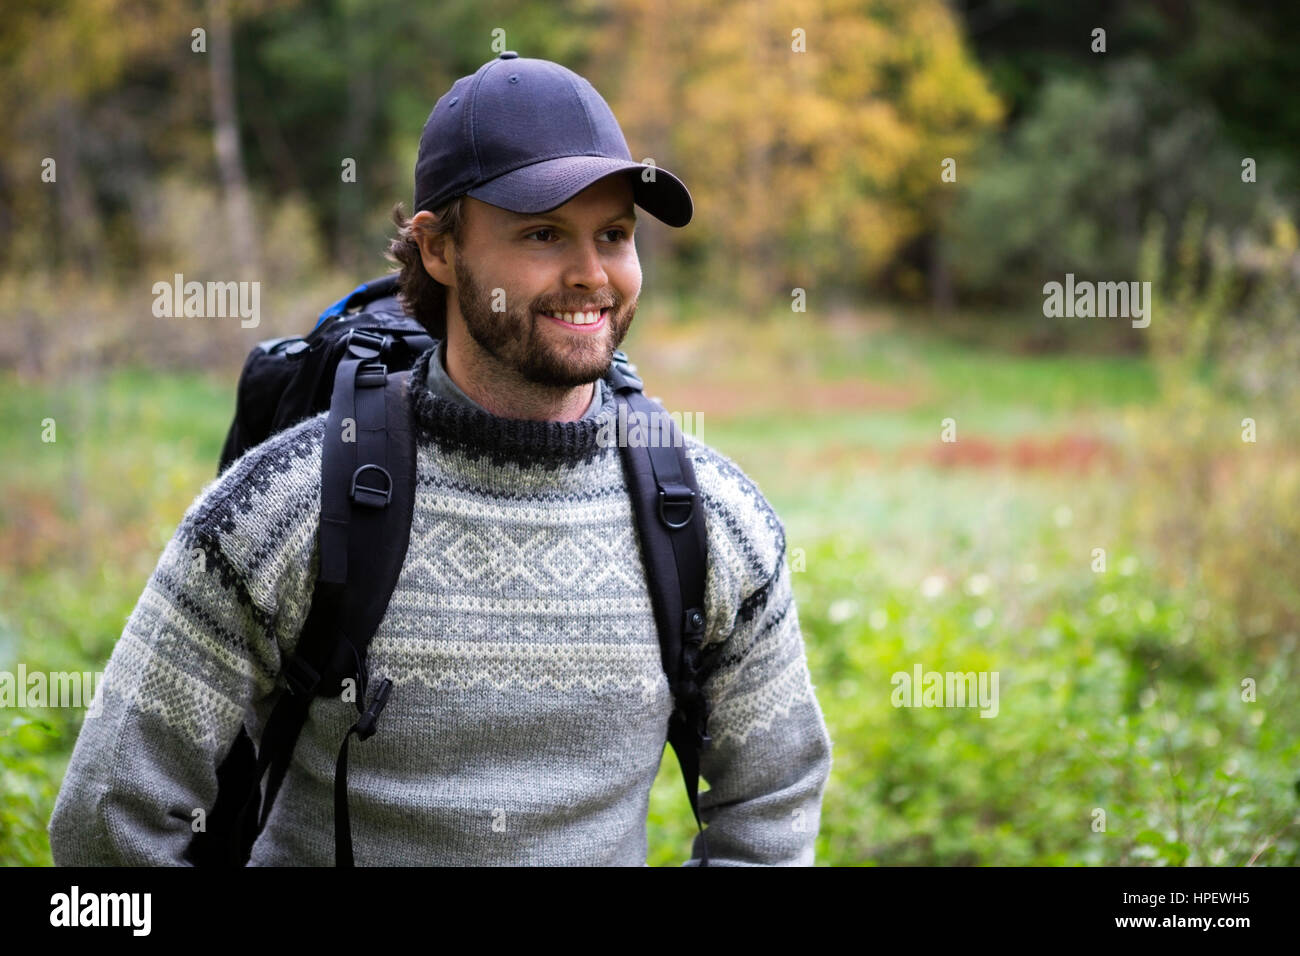 Smiling Young man with backpack hiking in forest Banque D'Images